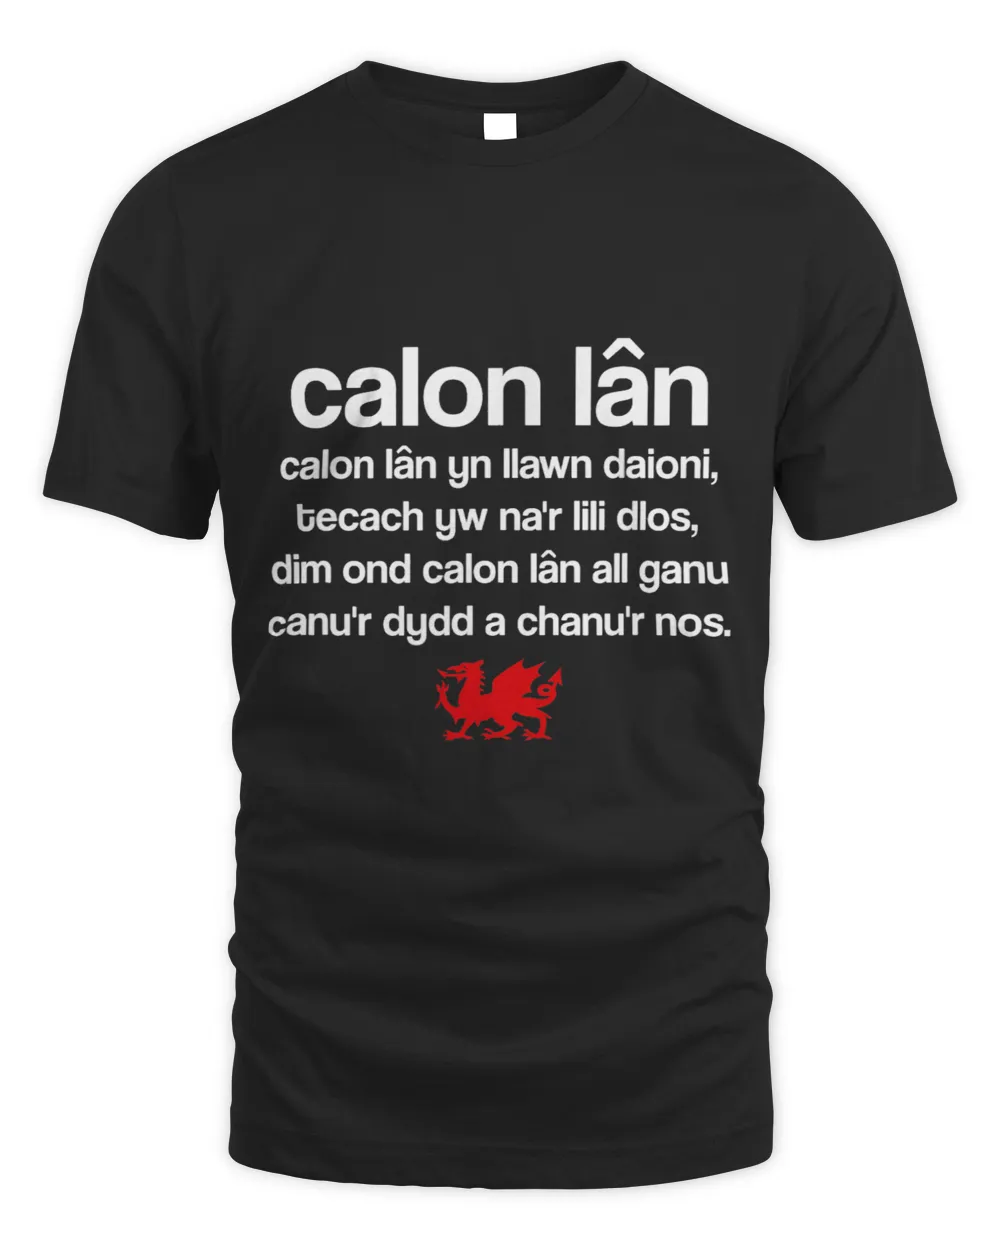 Calon Lan Wales Rugby Fan Wales Rugby Supporters